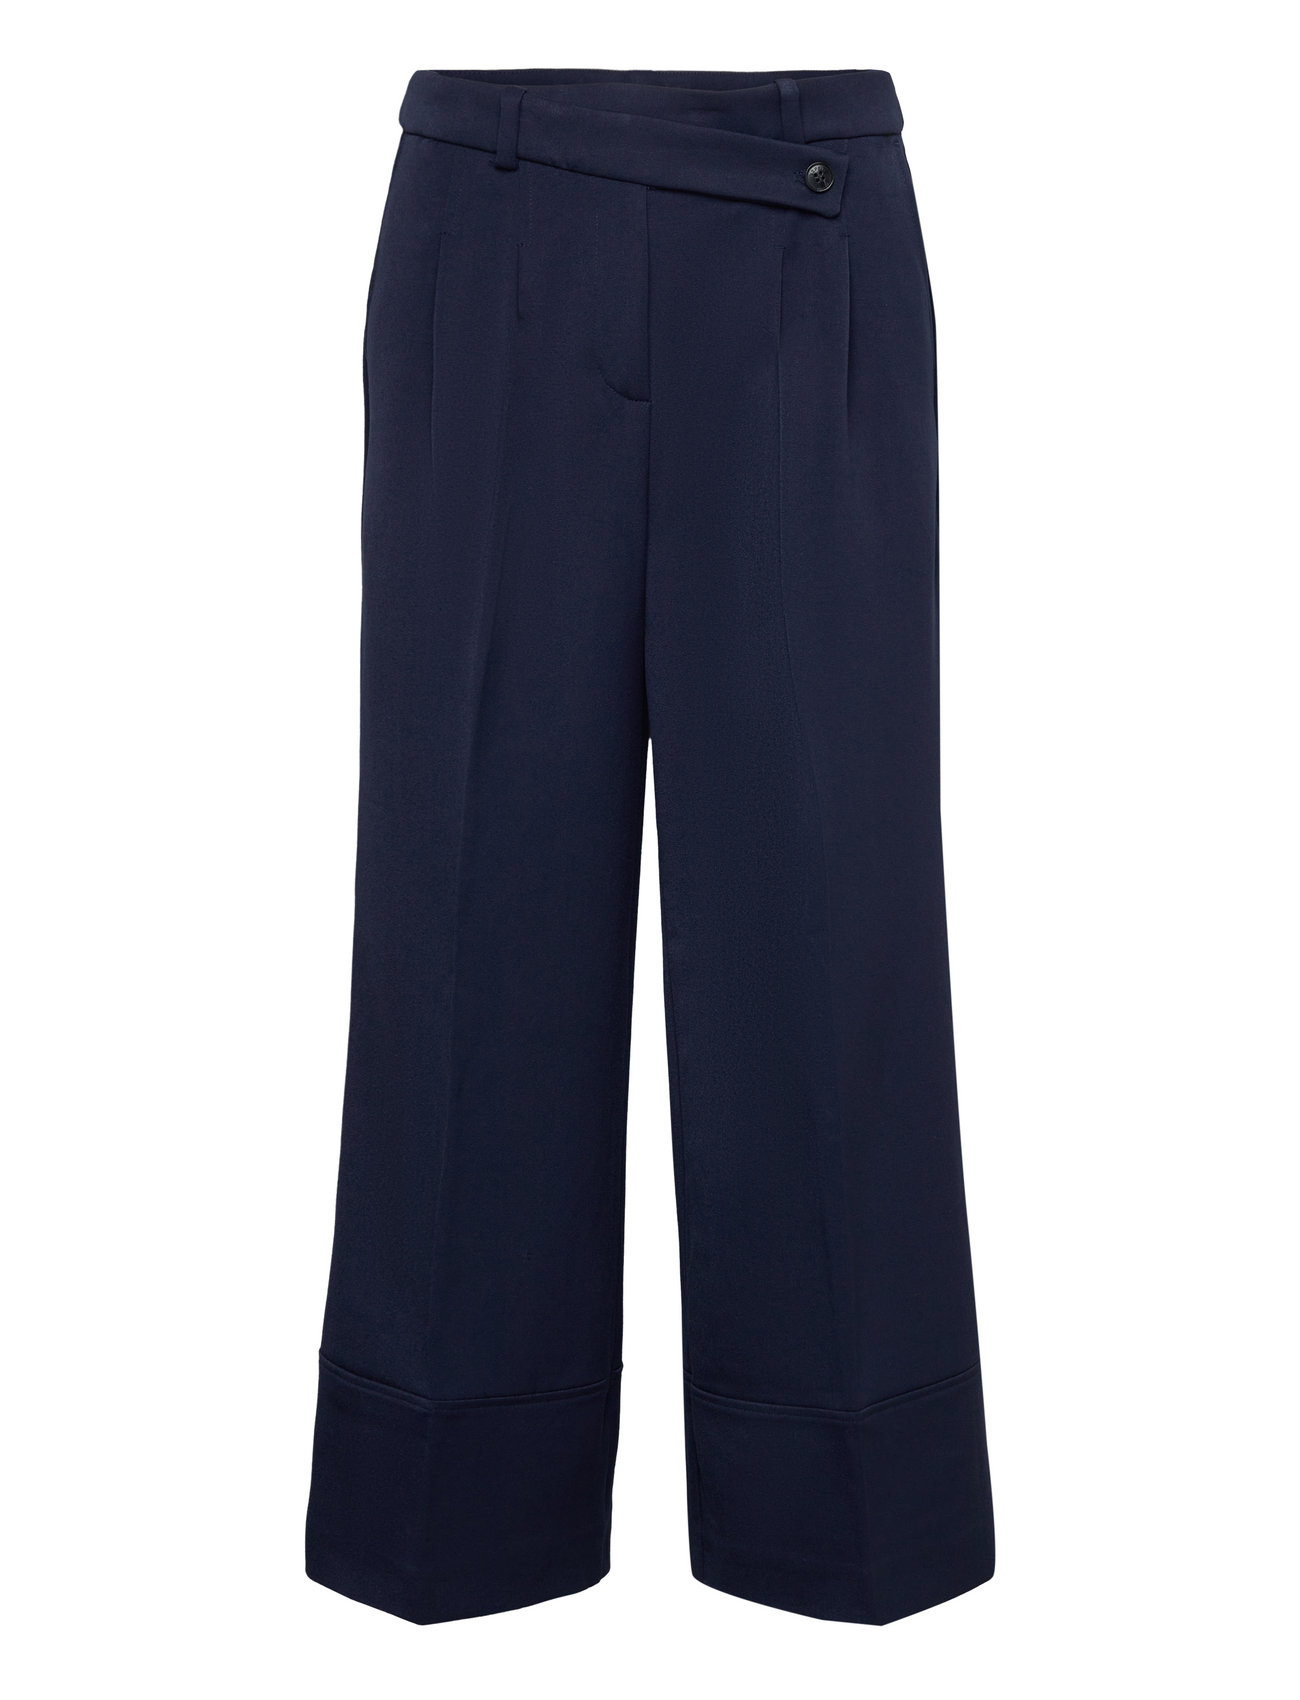 Culotte Trousers With Blended Viscose Bottoms Trousers Straight Leg Navy Esprit Casual